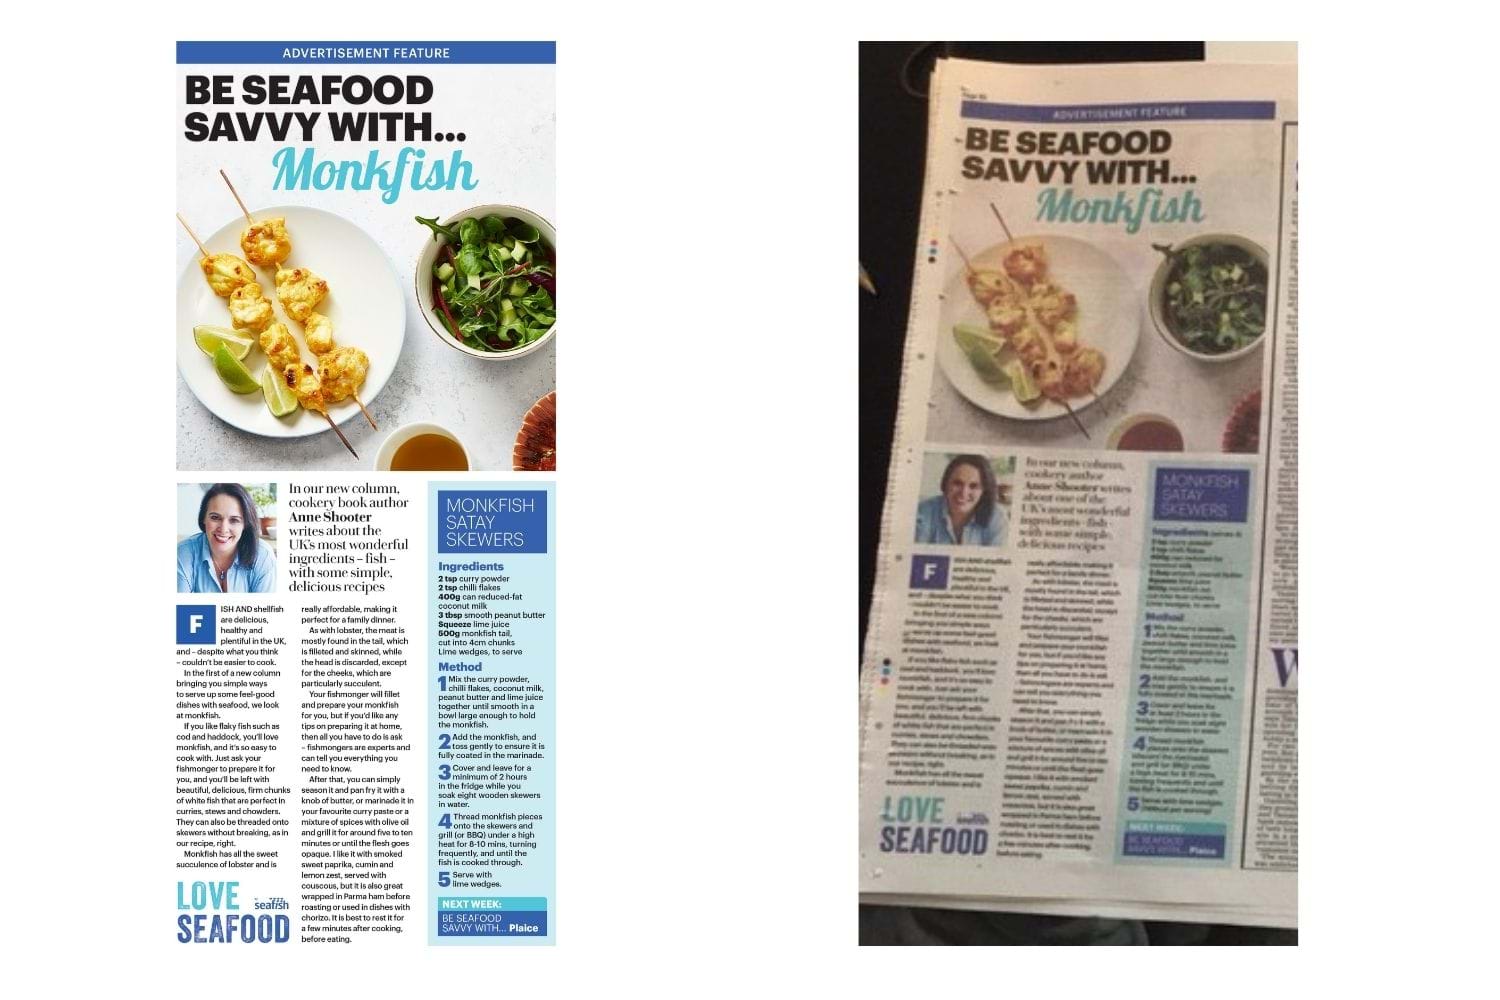 Screen shot of a Daily Mail article from the Love Seafood campaign titled 'Be seafood savvy with... monkfish' and a photo of the article in the paper